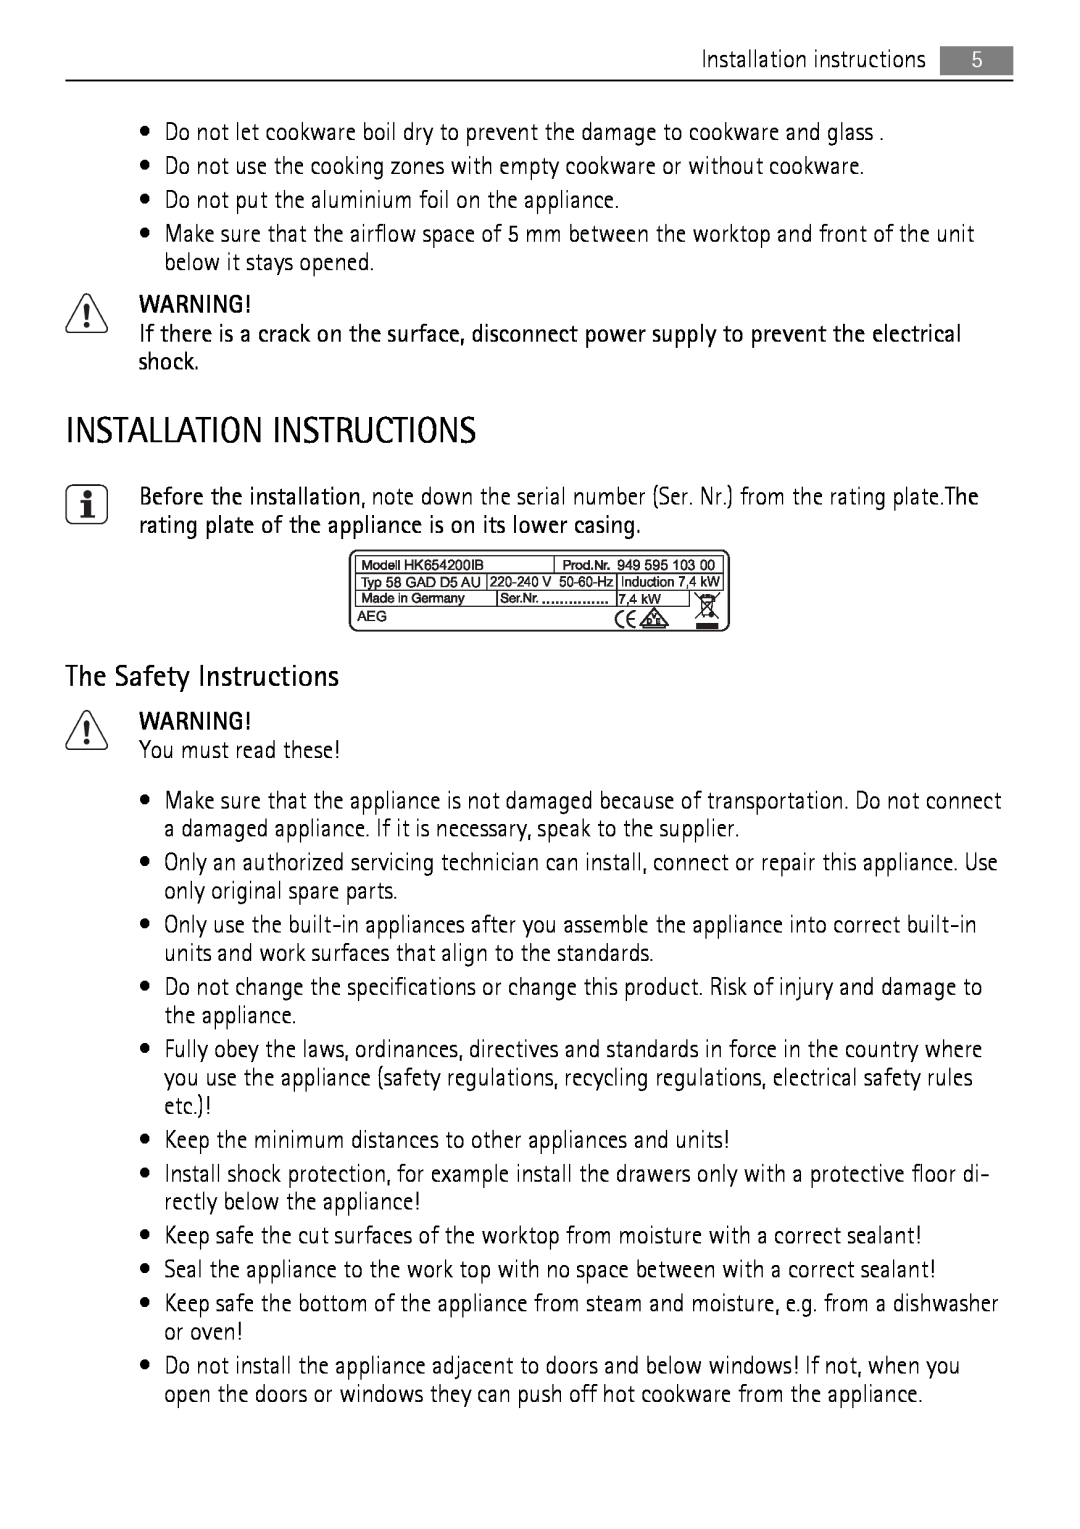 AEG HK654200IB user manual Installation Instructions, The Safety Instructions 